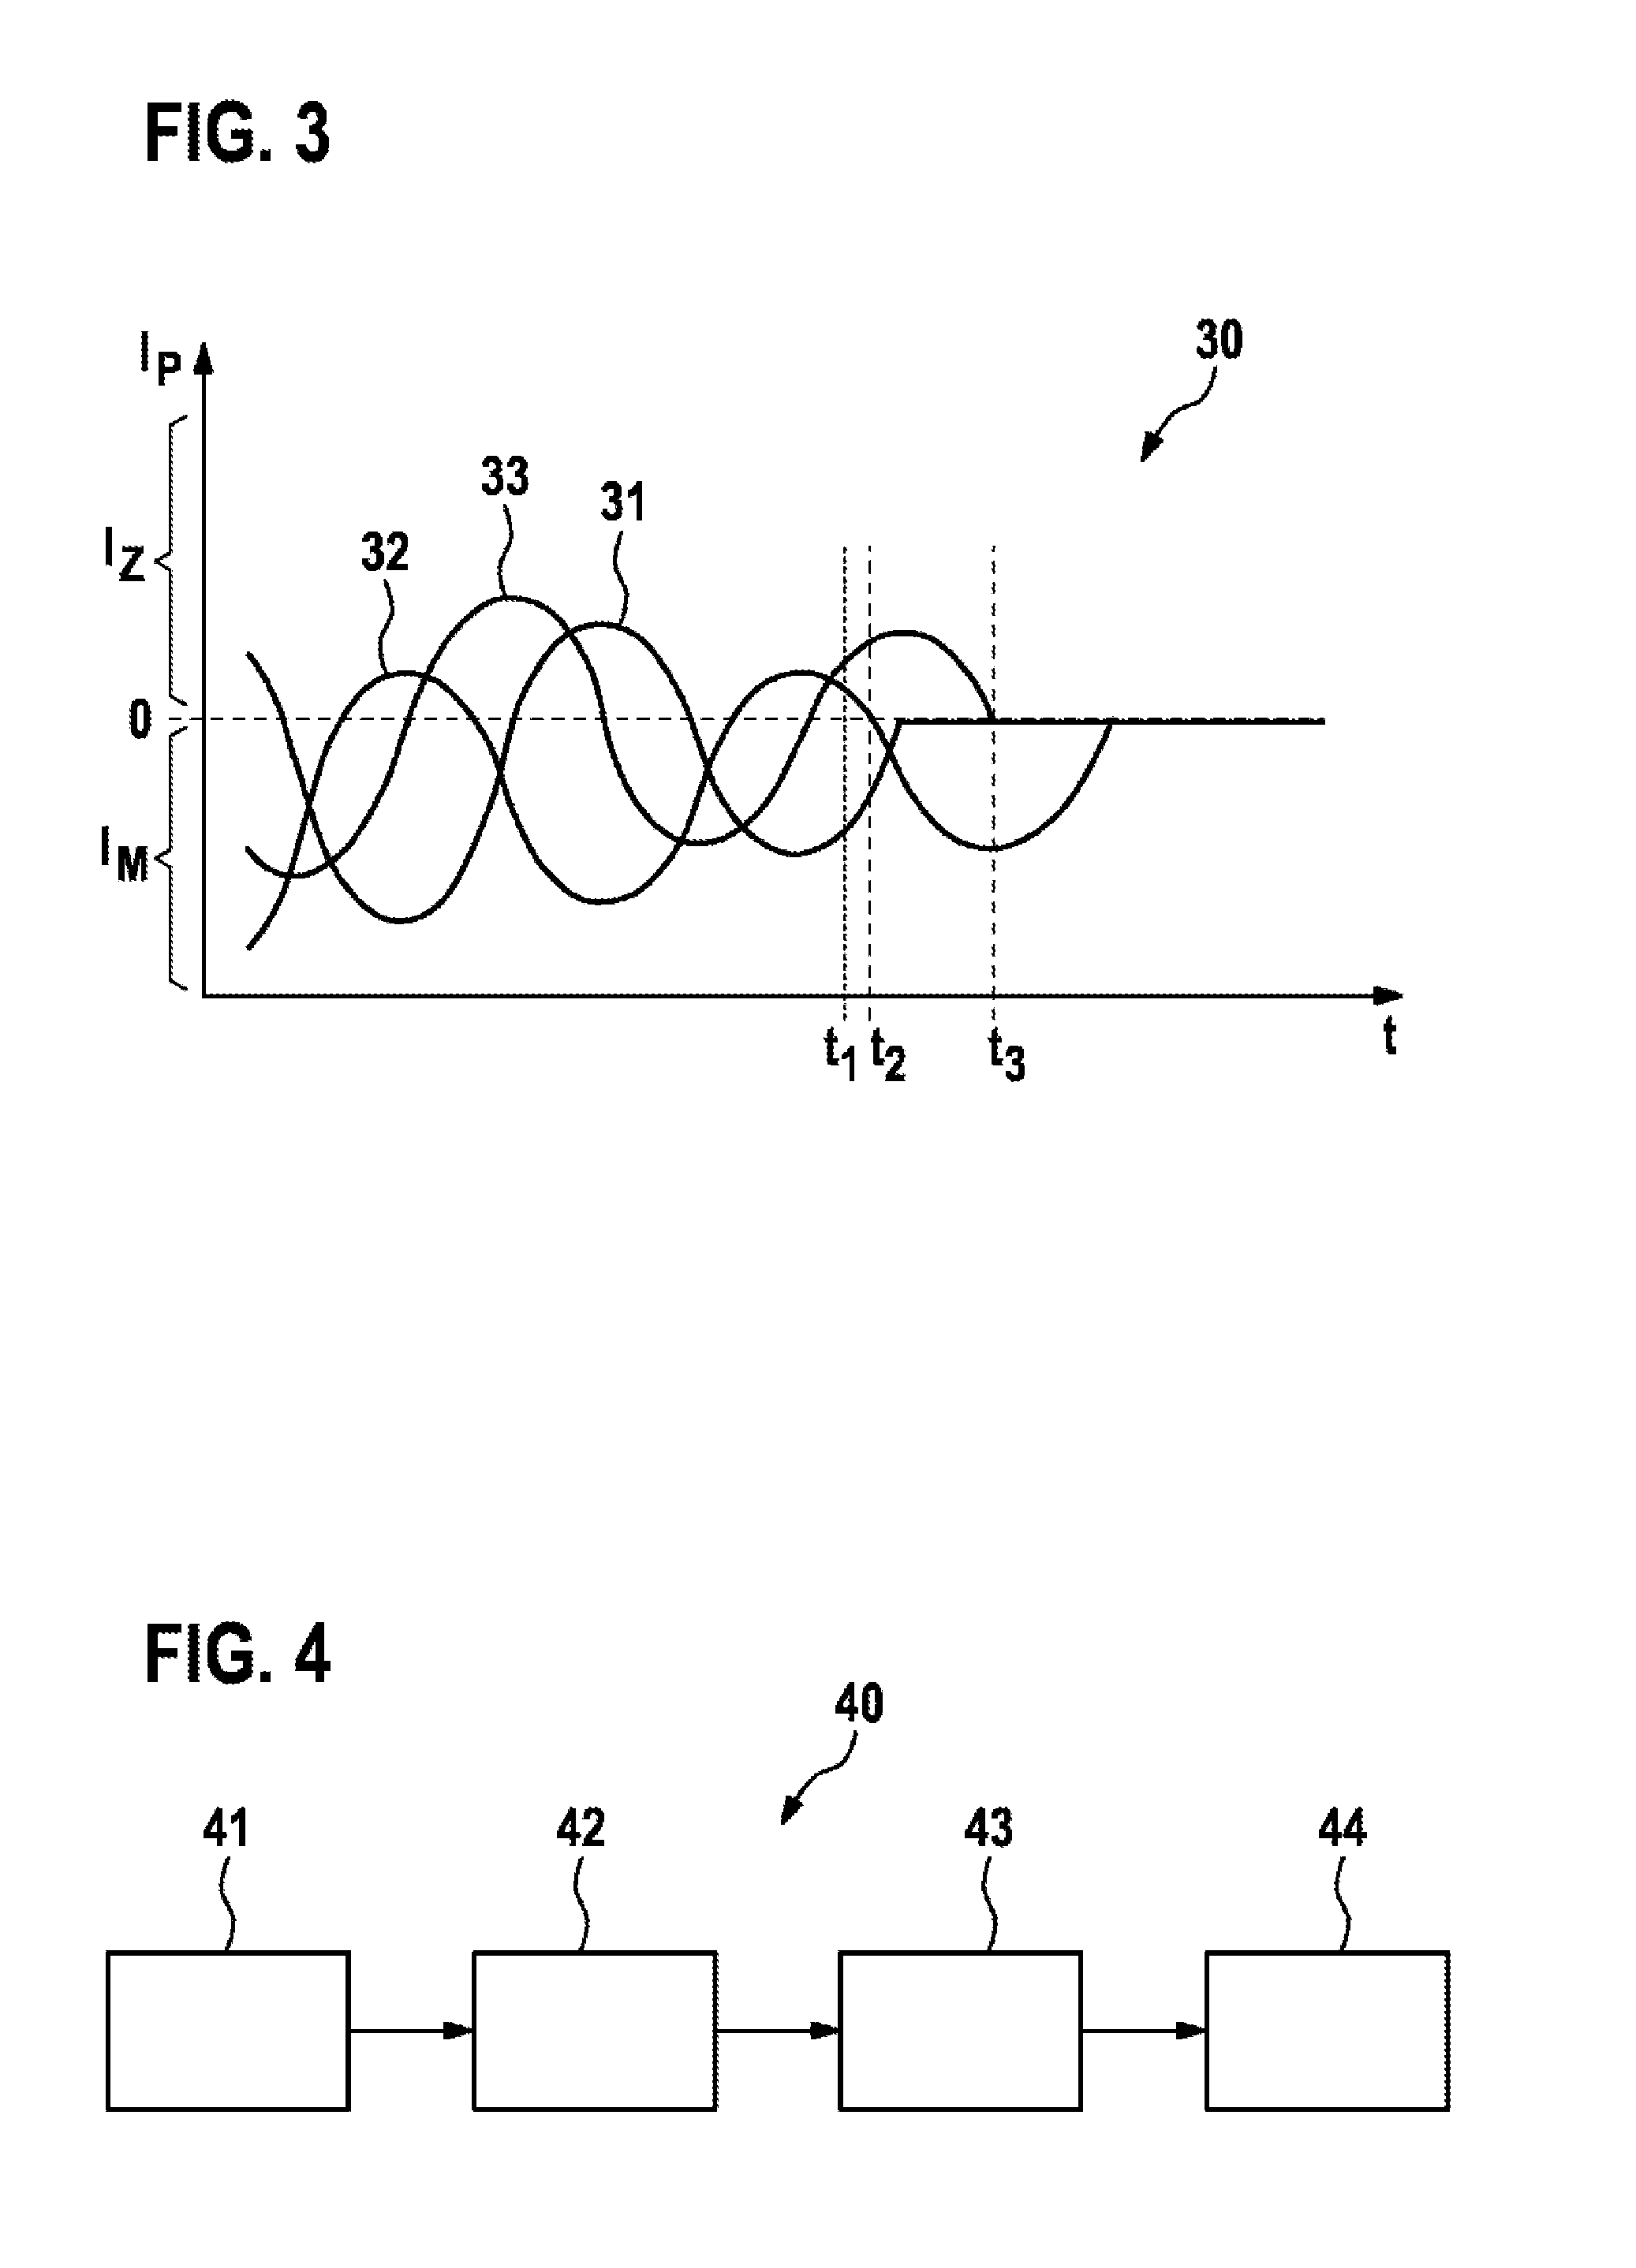 Operating state circuit for an inverter and method for setting operating states of an inverter